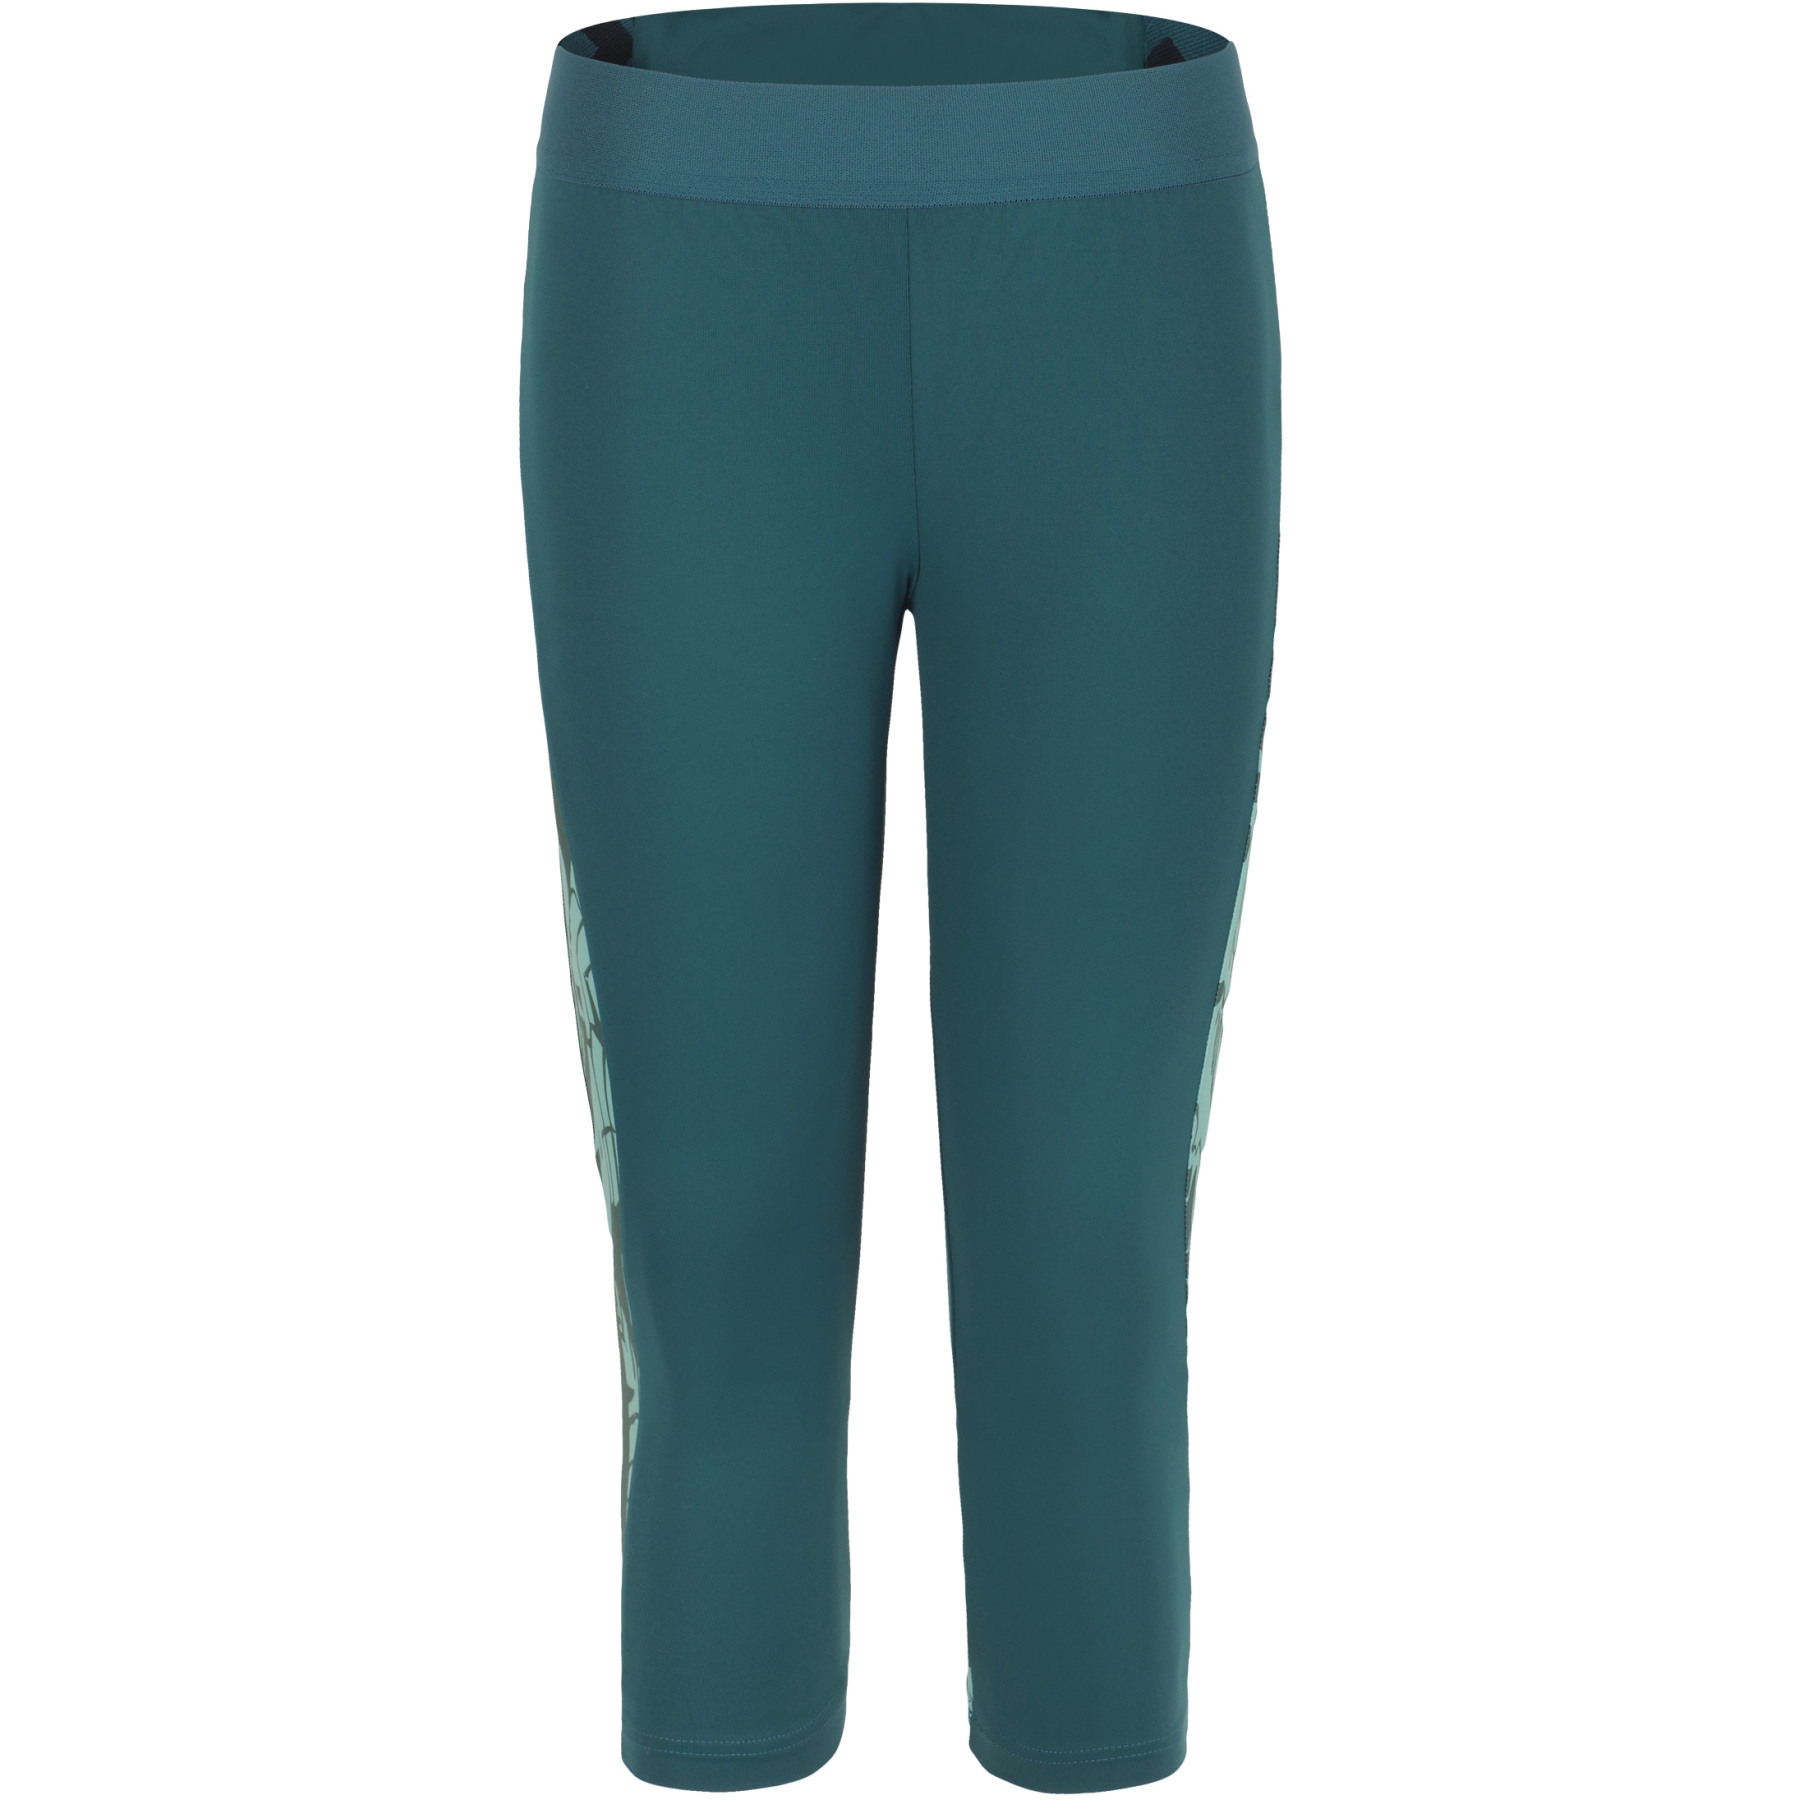 Picture of Directalpine Moab Lady 3/4 Leggings - emerald